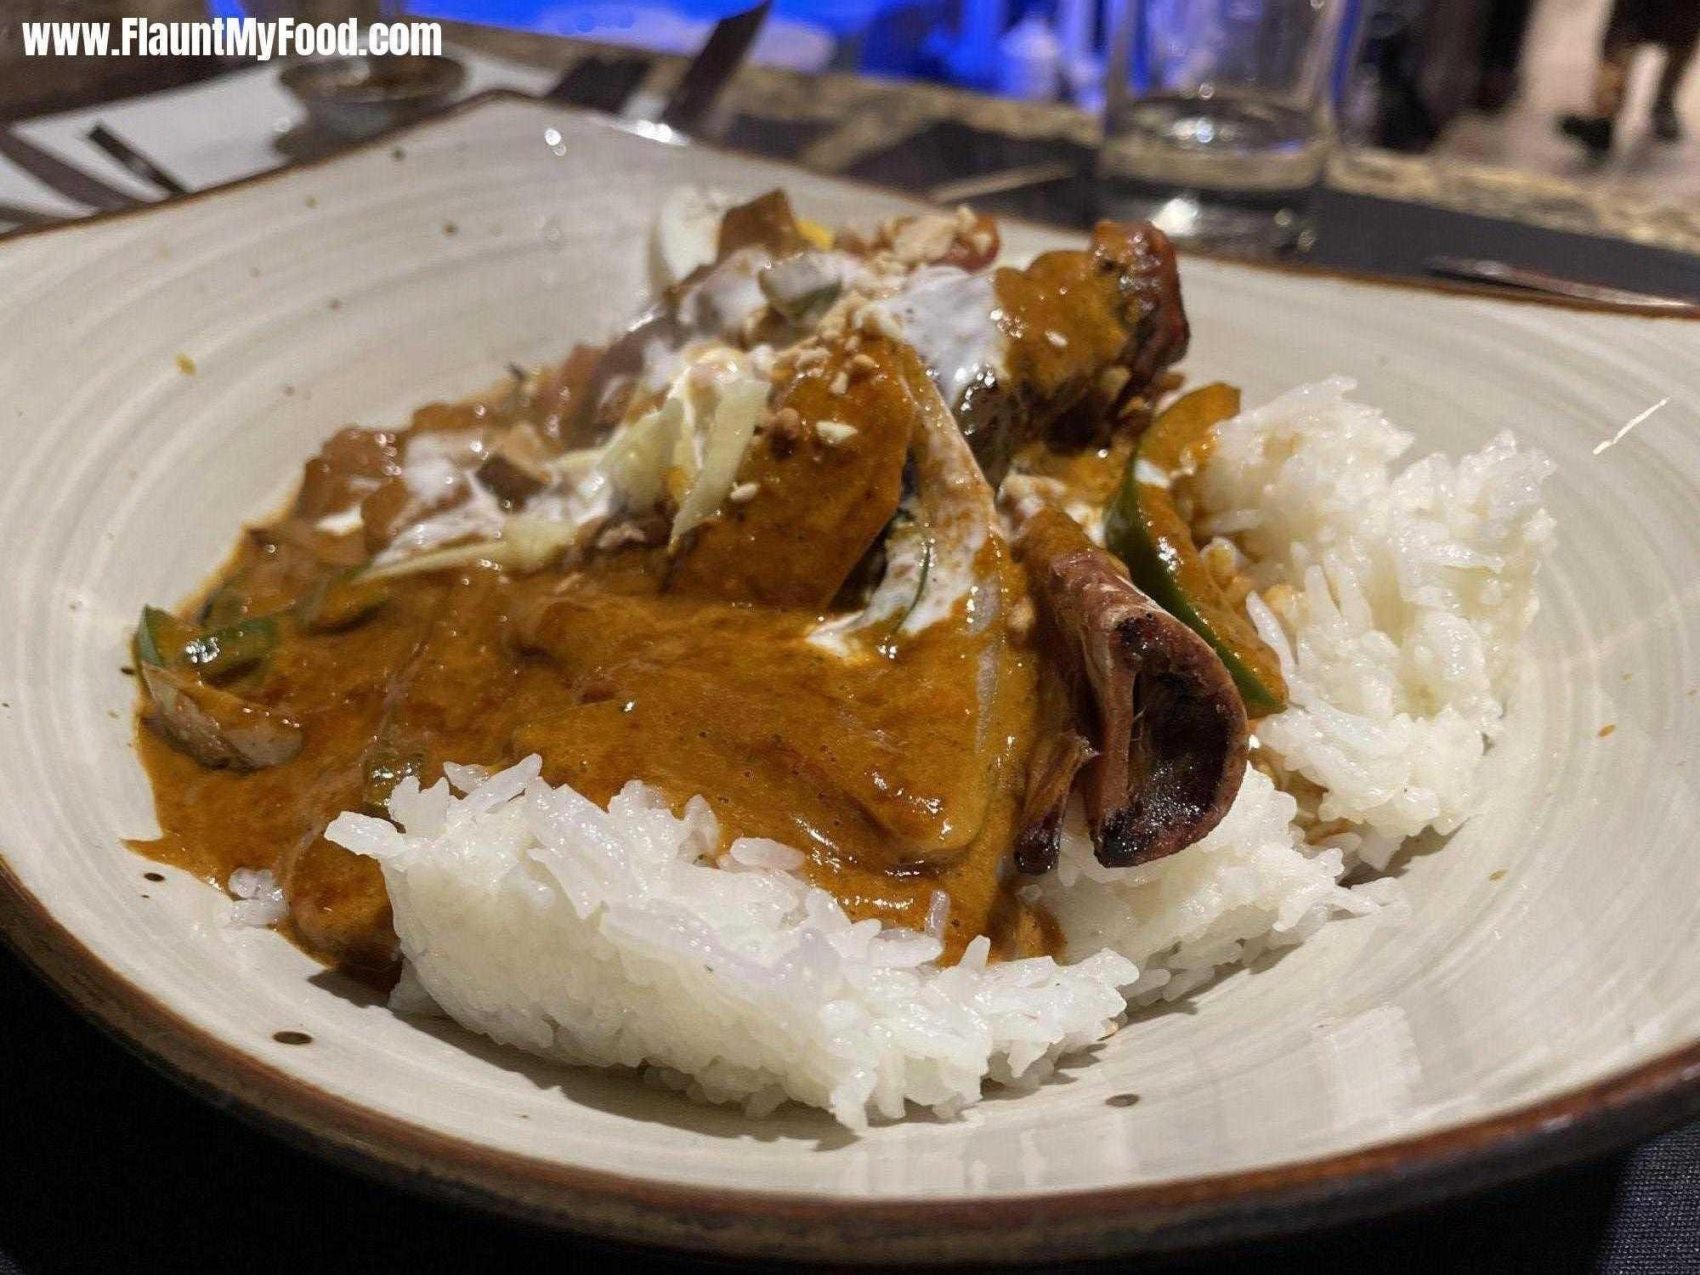 Massaman Curry Lamb Shank - Malai Kitchen RestaurantMalai Kitchen Massaman Curry Lamb Shank with rice Located in the Clearfork shopping plaza of Fort Worth Texas